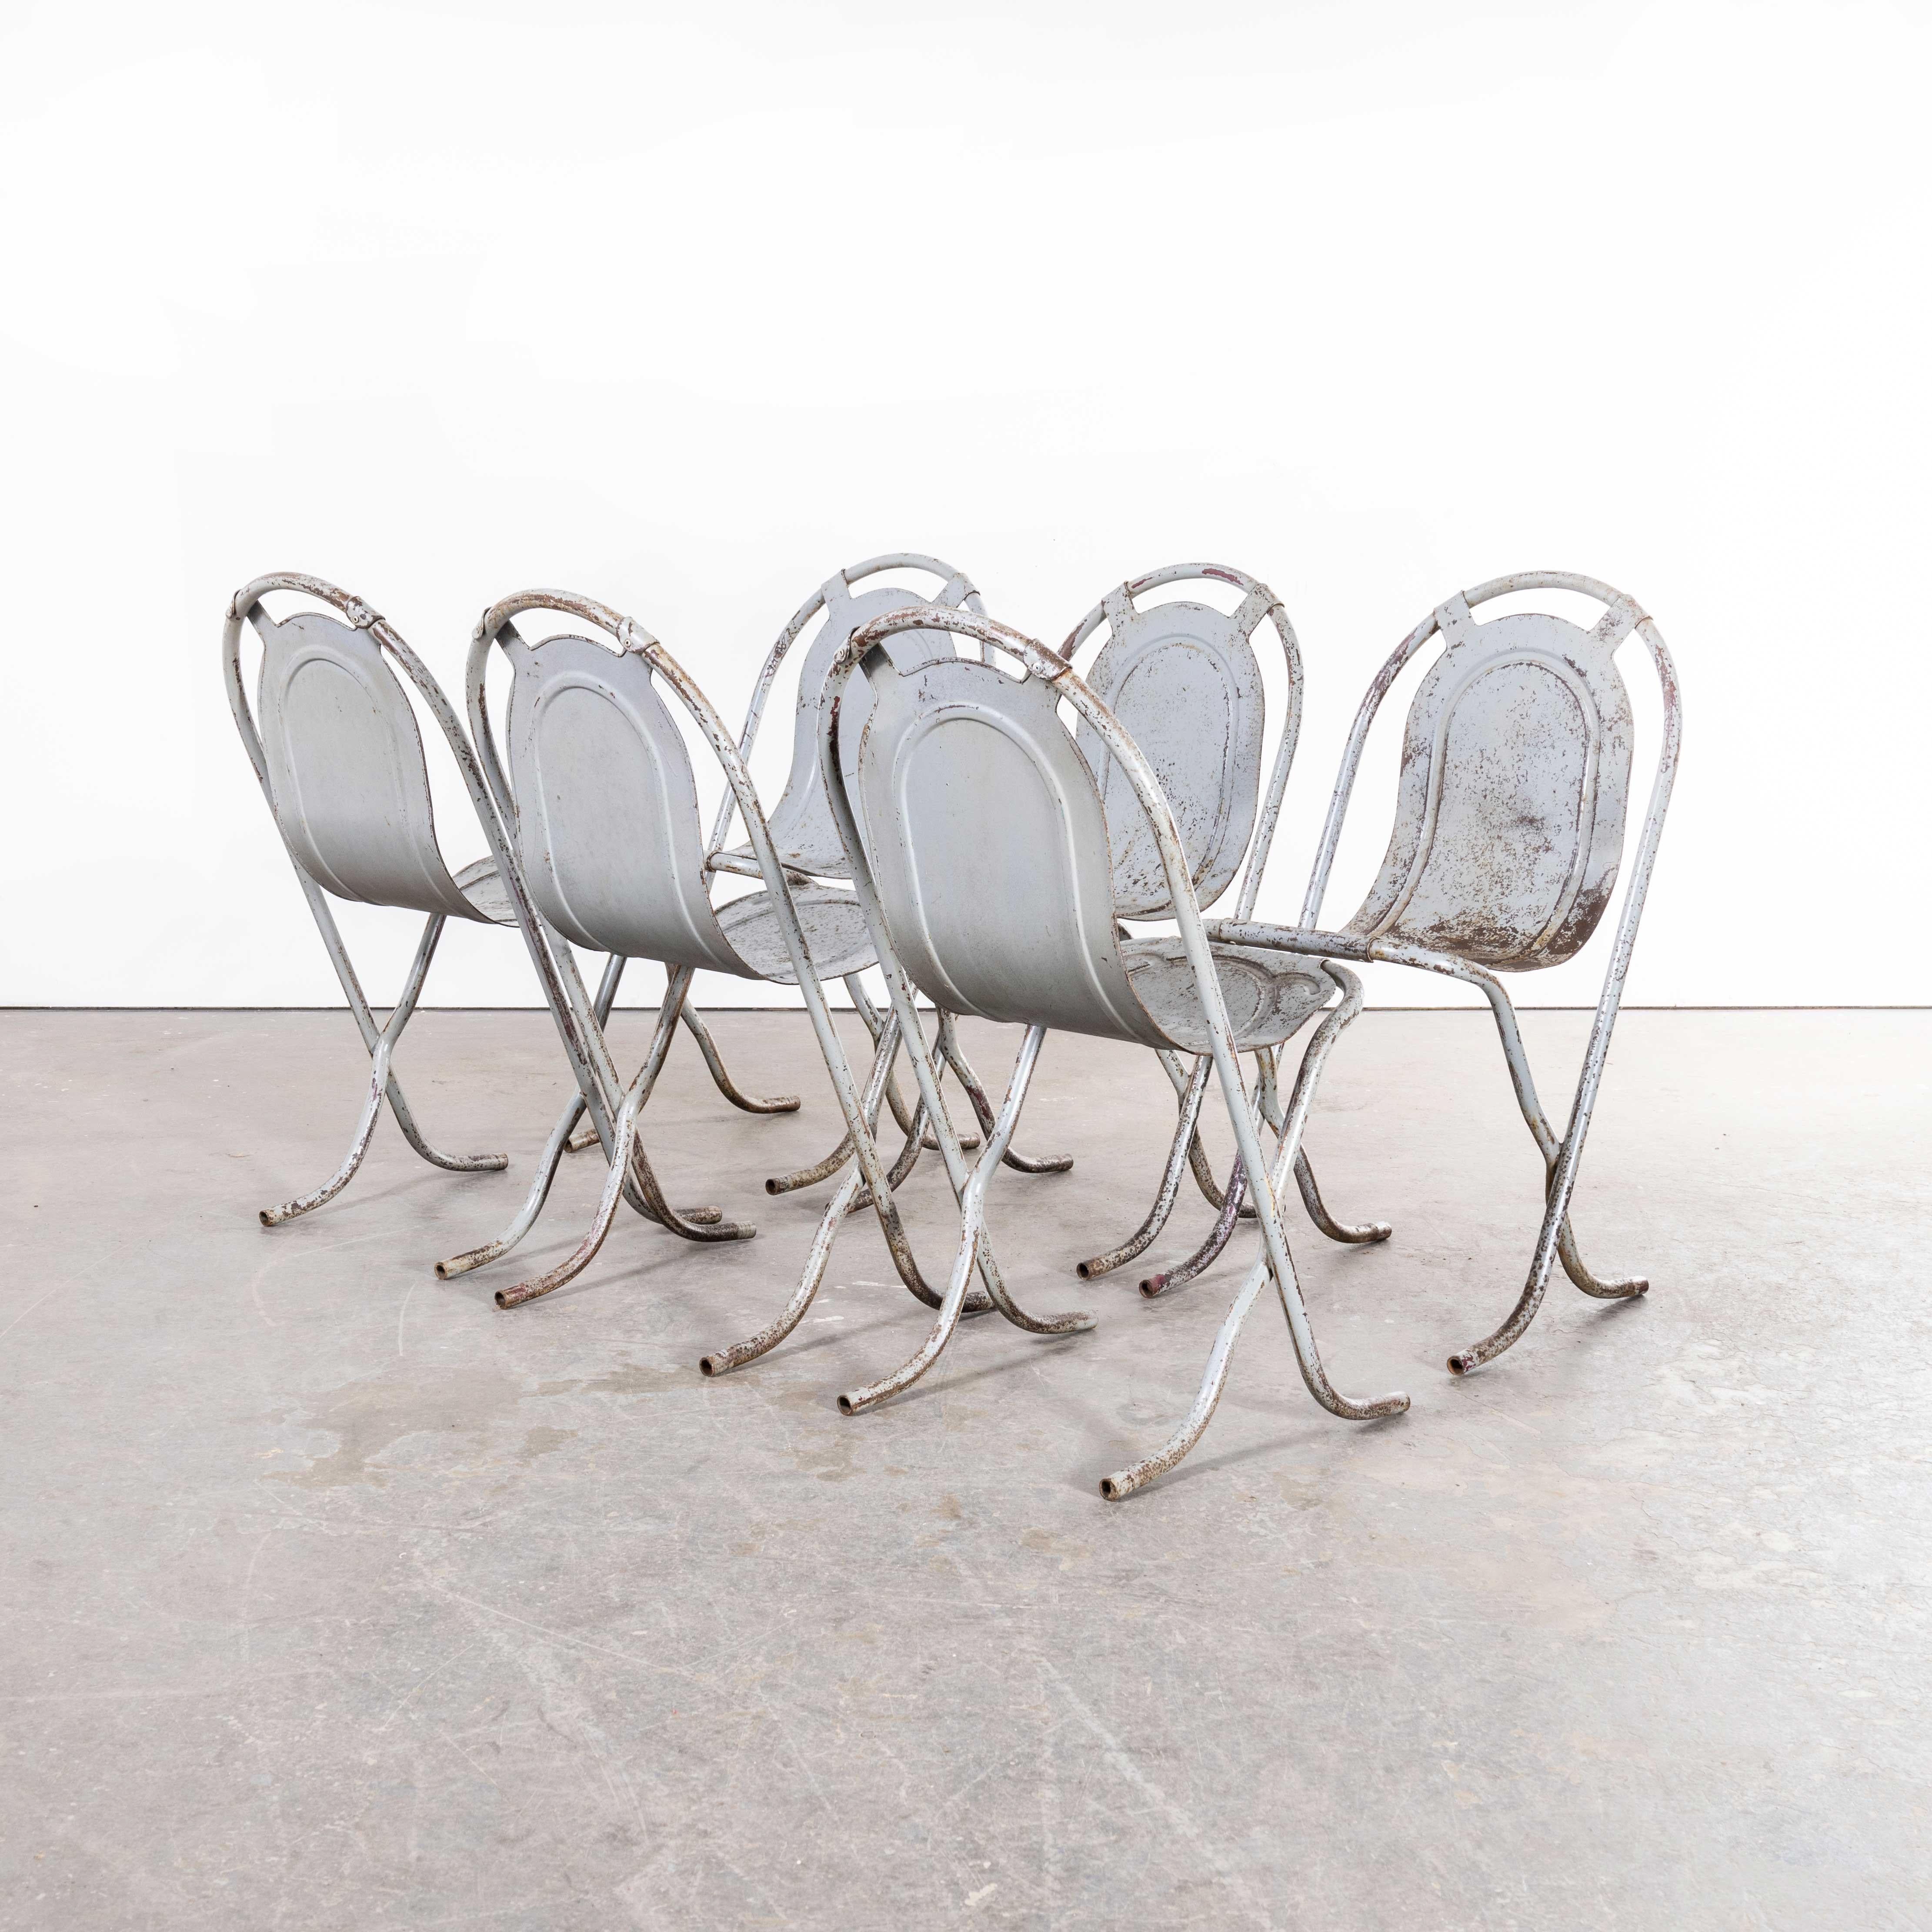 English 1940s Original British Stak a Bye Chairs, Grey, Set of Six For Sale